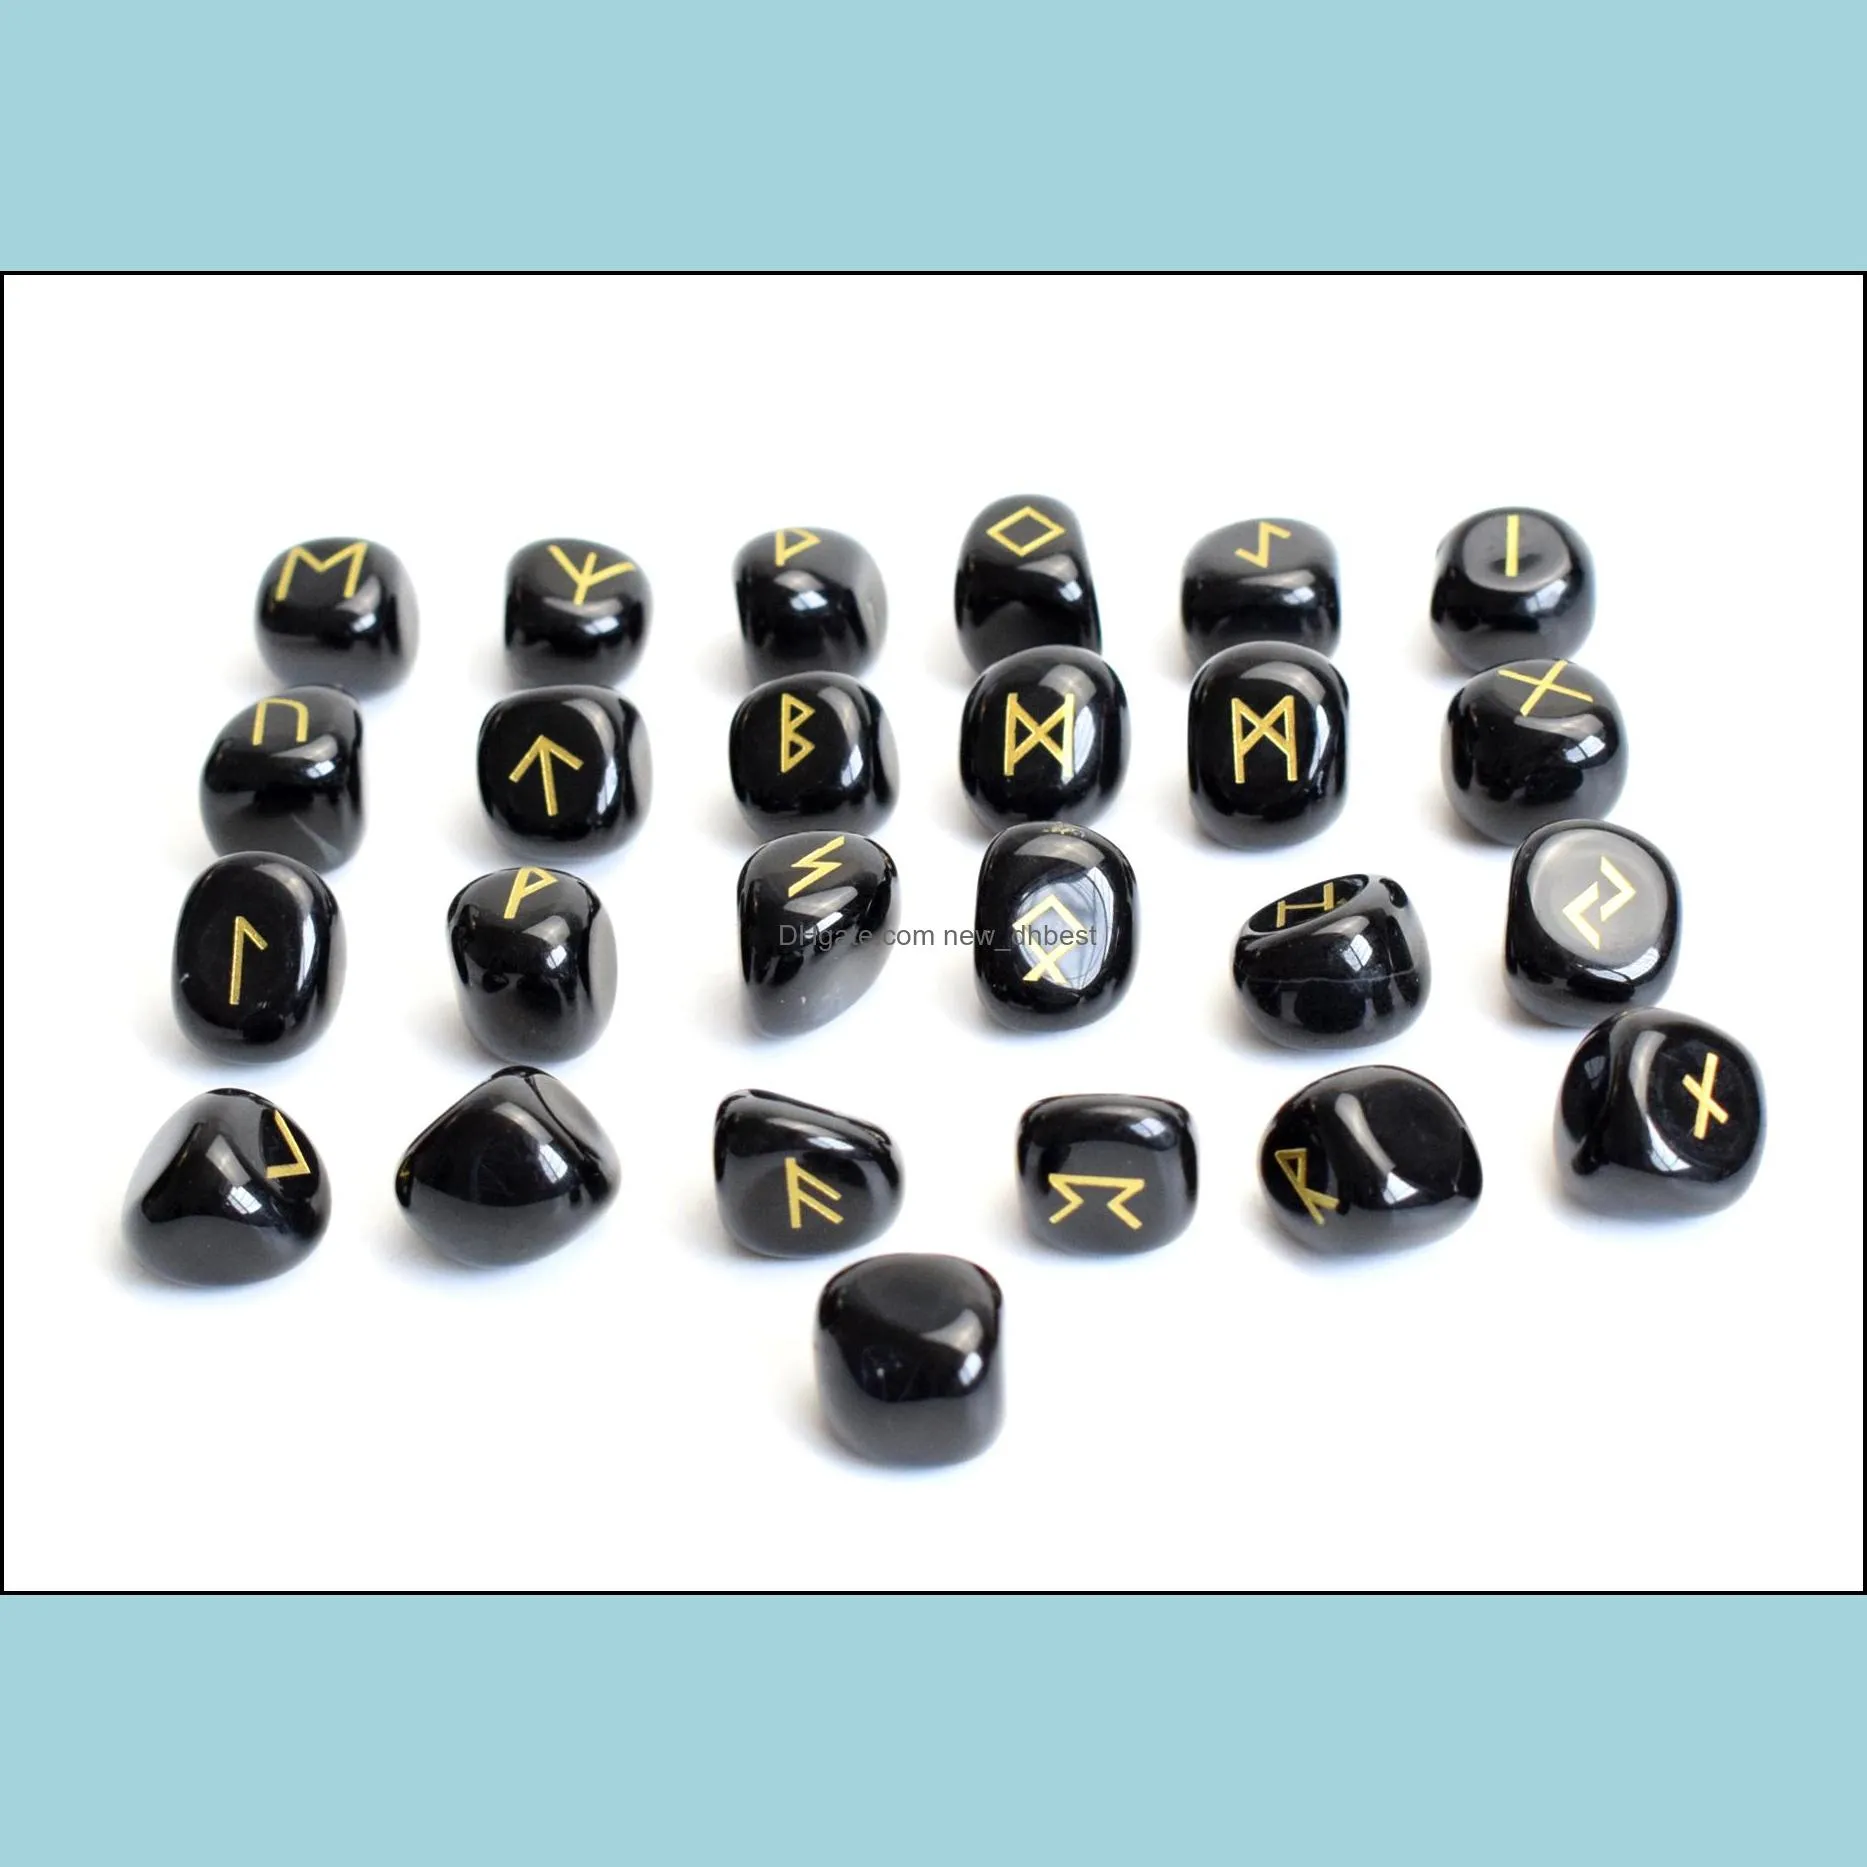 Set of 25 Black Agate Rune Stones Set Engraved Pagan Lettering with a Free Velvet Pouch